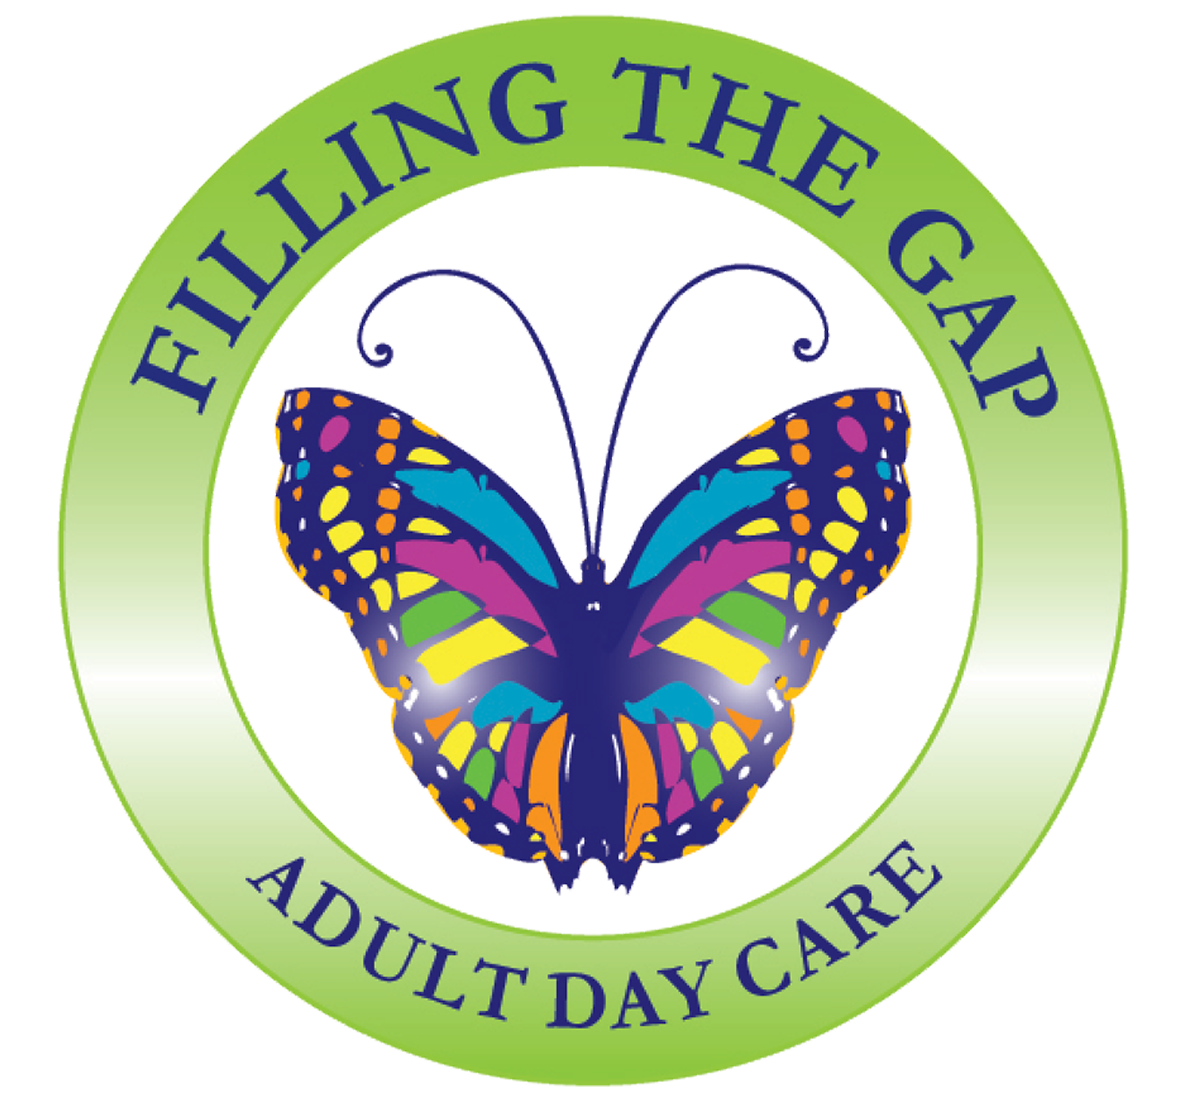 Logo of Filling the Gap Adult Day Care